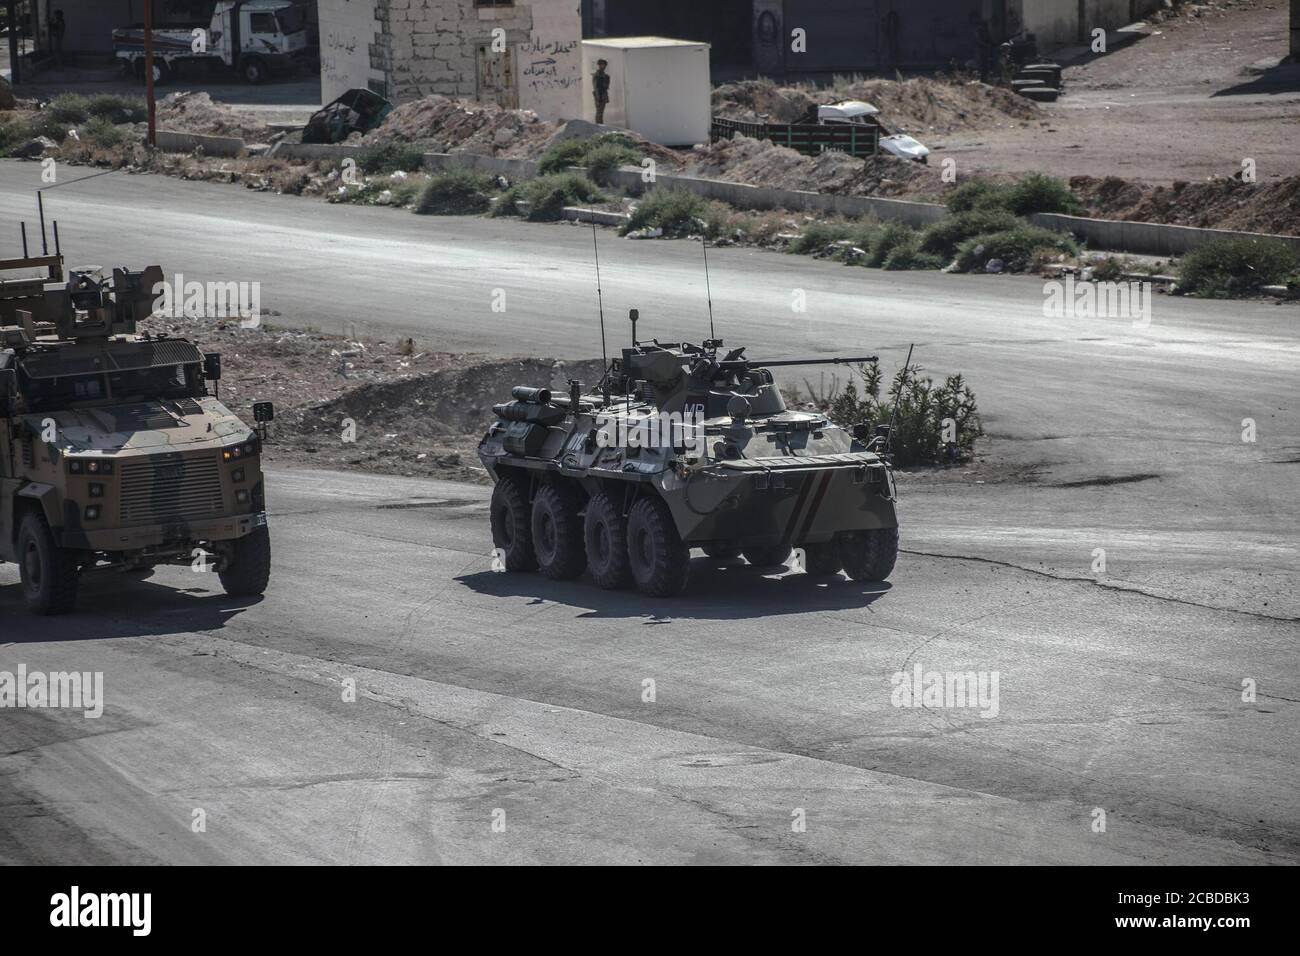 Idlib, Syria. 12th Aug, 2020. The Russian Military and the Turkish military conducted their 24th joint patrol on the M4 highway in the northwestern Syria region of Greater Idlib, on August 12, 2020. The joint patrol set off from the town of Tronba in southern Idlib and reached the town of Ain Hawr in northern Lattakia, completing its entire route. No incidents whatsoever were reported during the patrol. (Photo by Azalden Idlib/INA Photo Agency/Sipa USA) Credit: Sipa USA/Alamy Live News Stock Photo